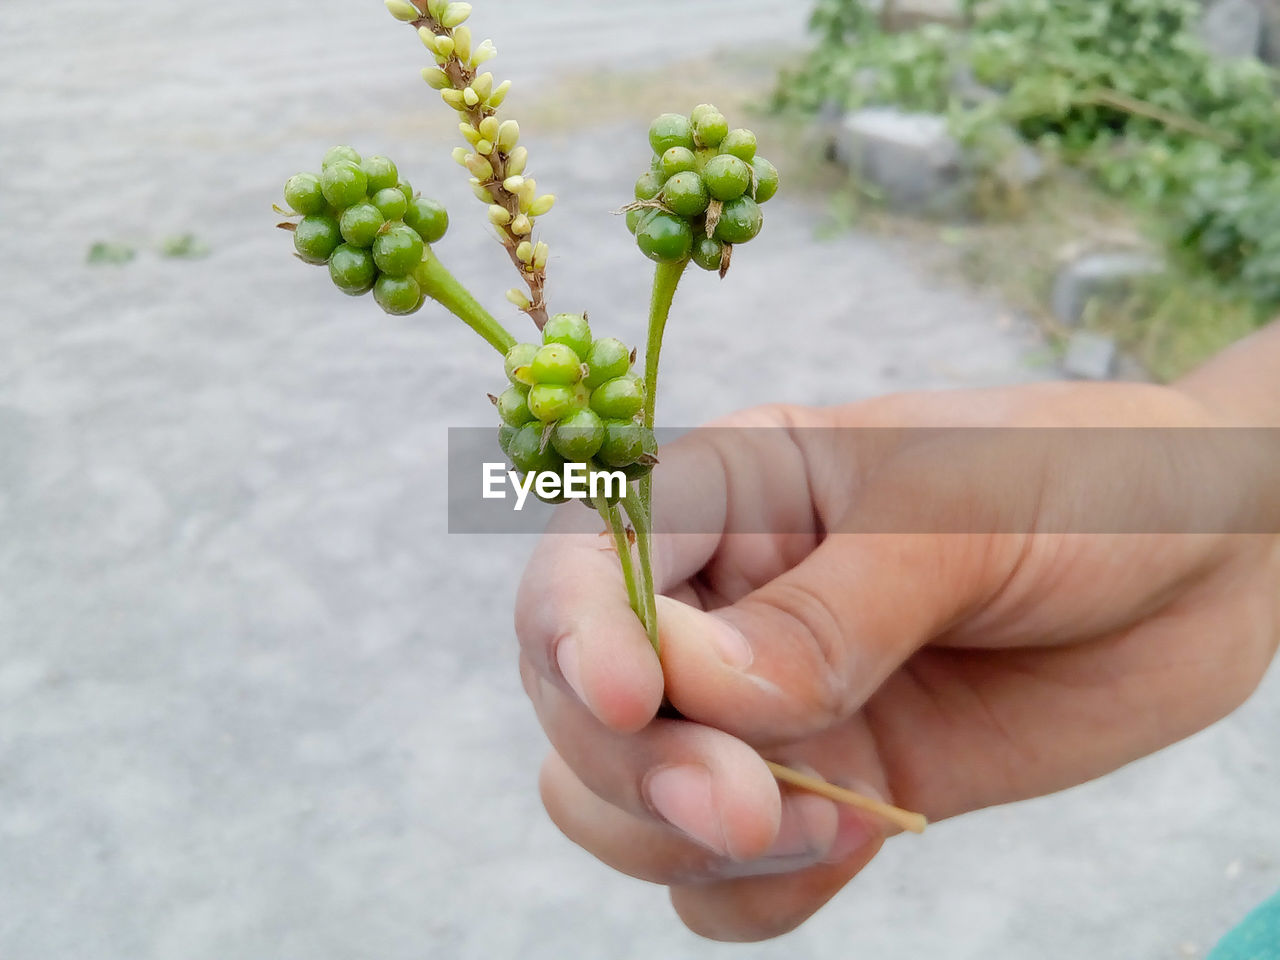 Cropped hand of person holding flower buds